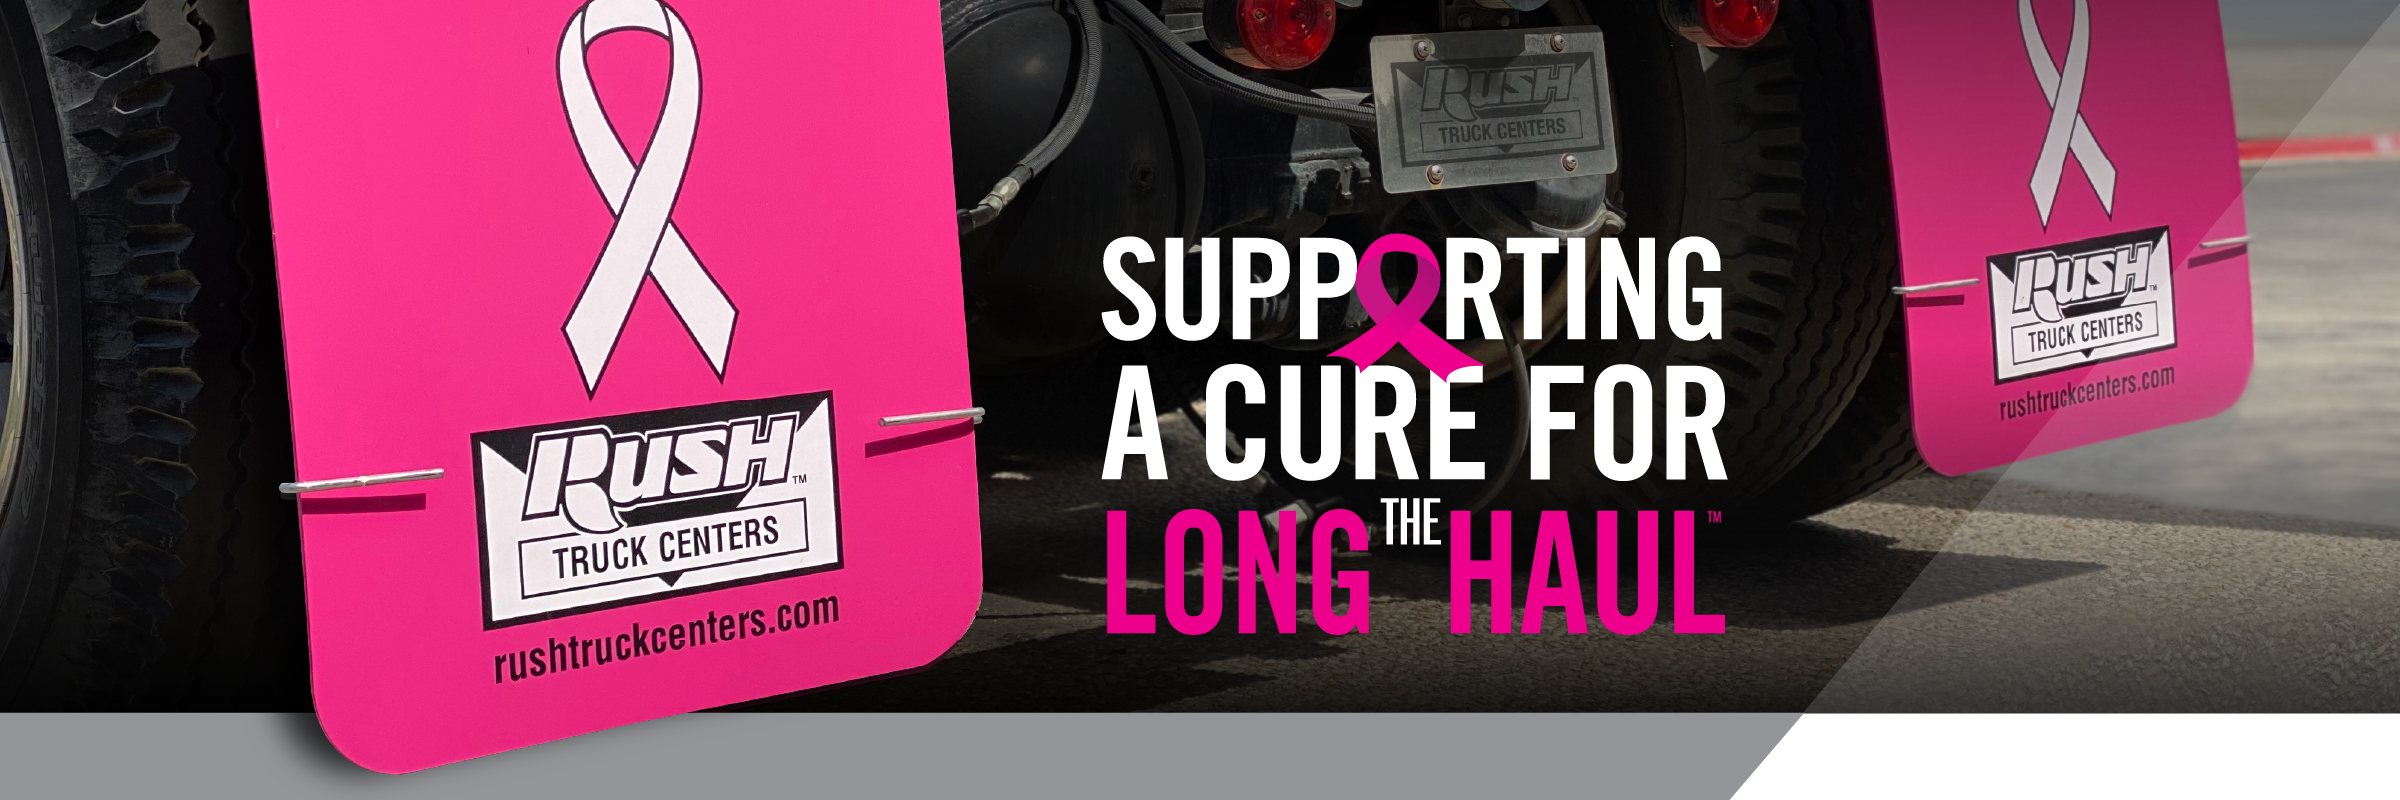 Breast Cancer Awareness Pink Mudflaps | Supporting a Cure for the Long Haul